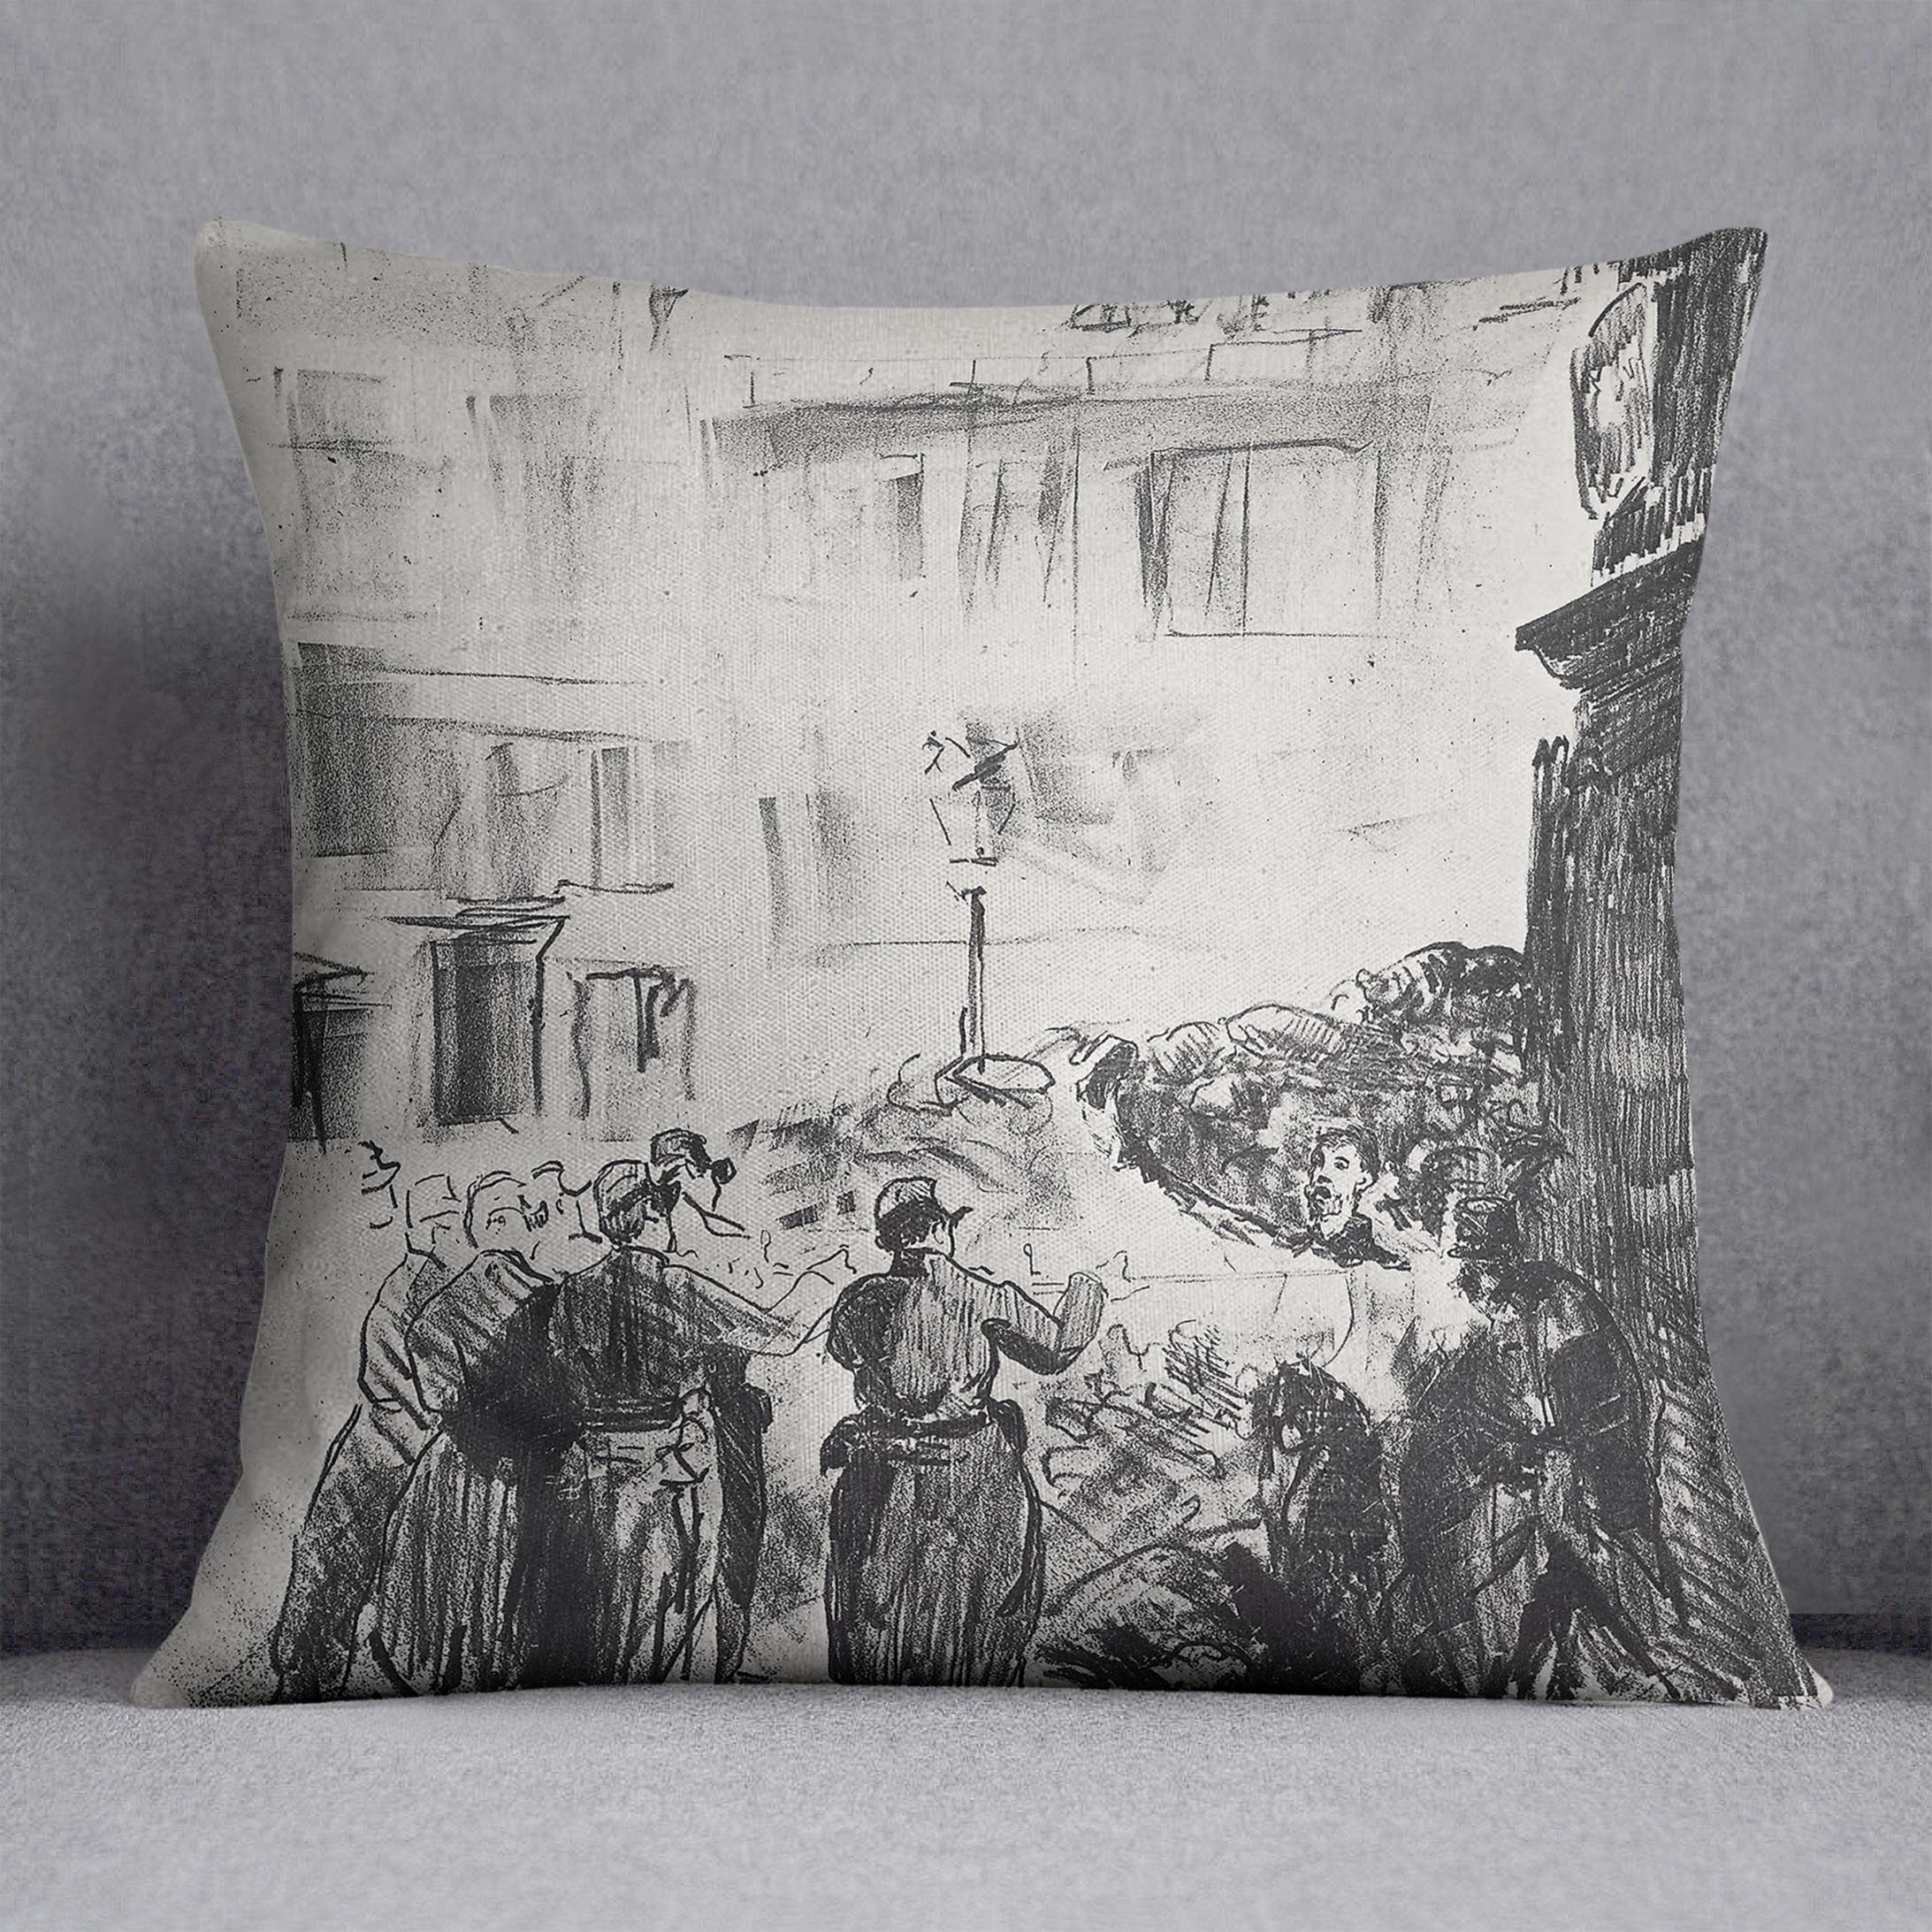 The Barricade by Manet Cushion